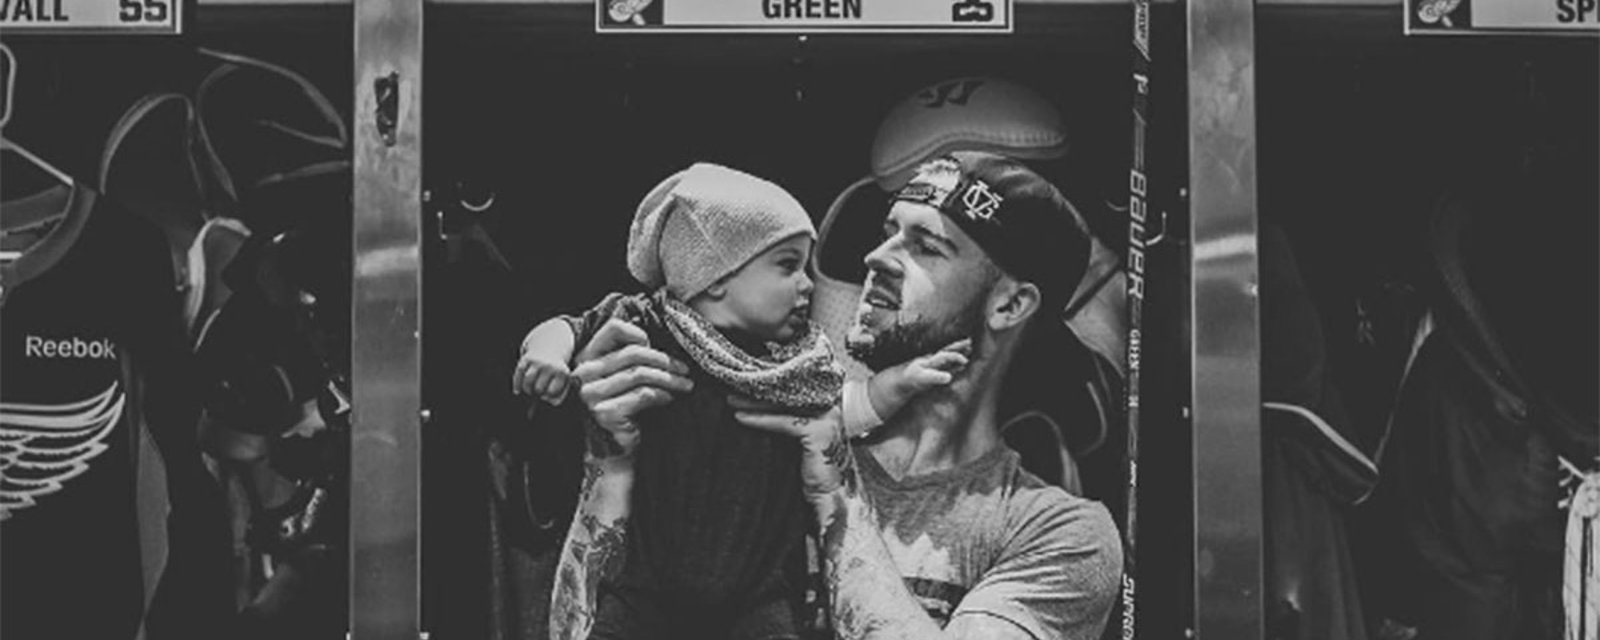 Mike Green is an amazing dad!